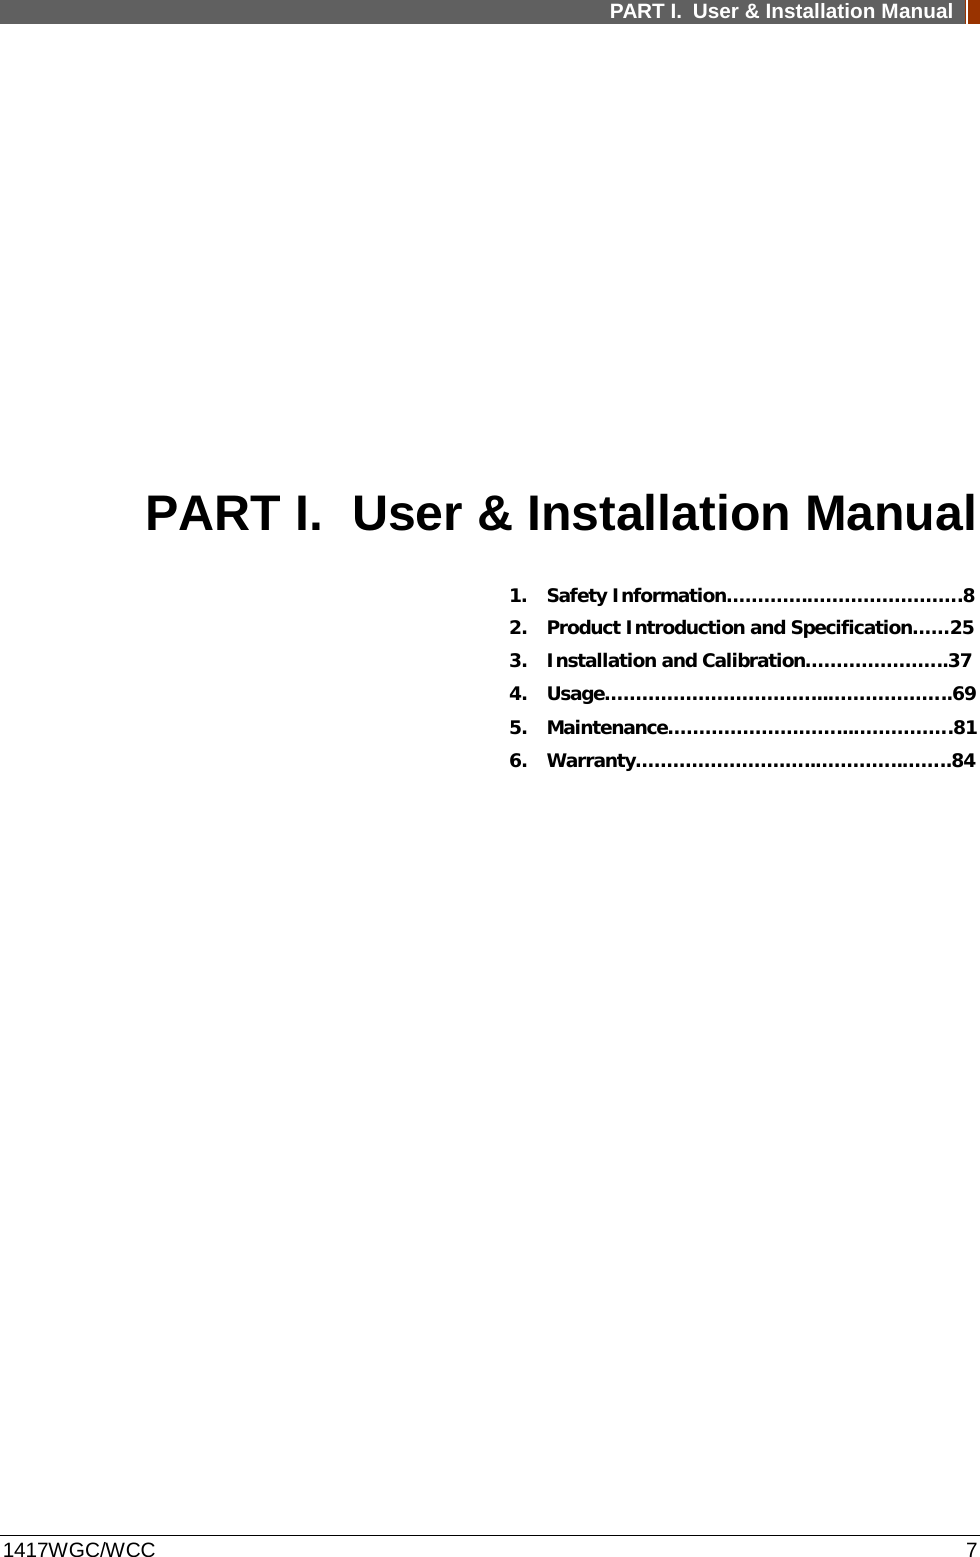 PART I. User &amp; Installation Manual  1417WGC/WCC  7 PART I. User &amp; Installation Manual 1. Safety Information………….…………………….8 2. Product Introduction and Specification……25 3. Installation and Calibration…………………..37 4. Usage……………………………...………………..69 5. Maintenance………………………...…………….81 6. Warranty………………………..…………..……..84         